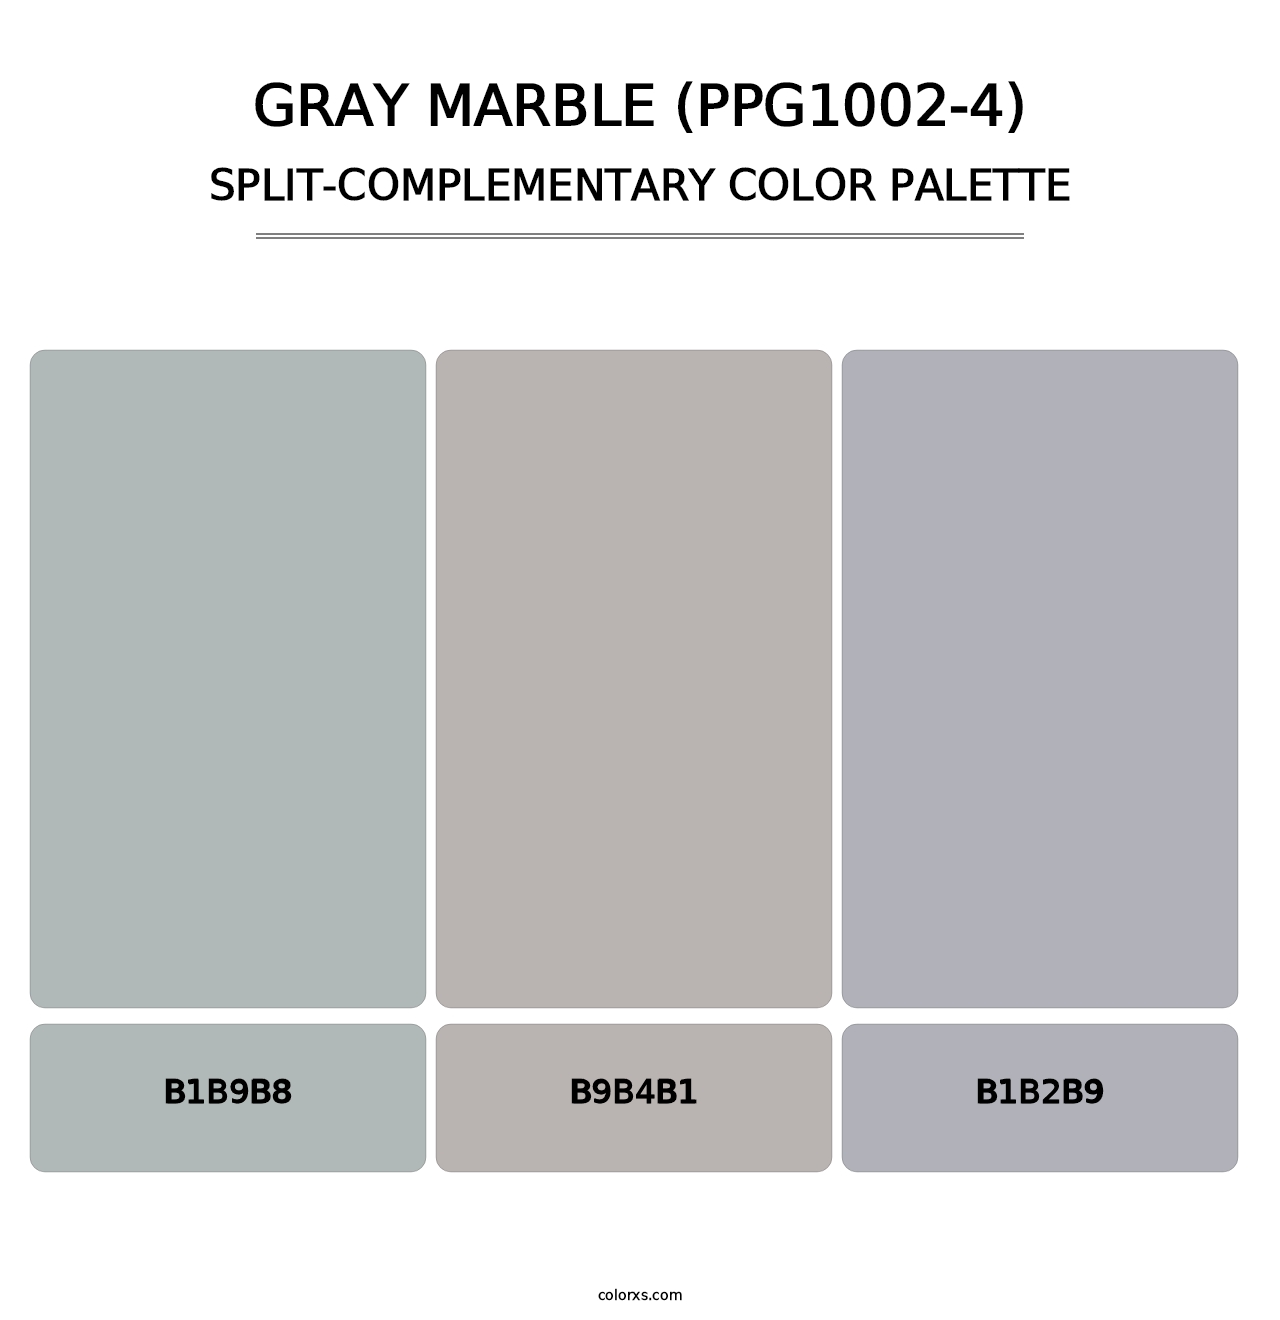 Gray Marble (PPG1002-4) - Split-Complementary Color Palette